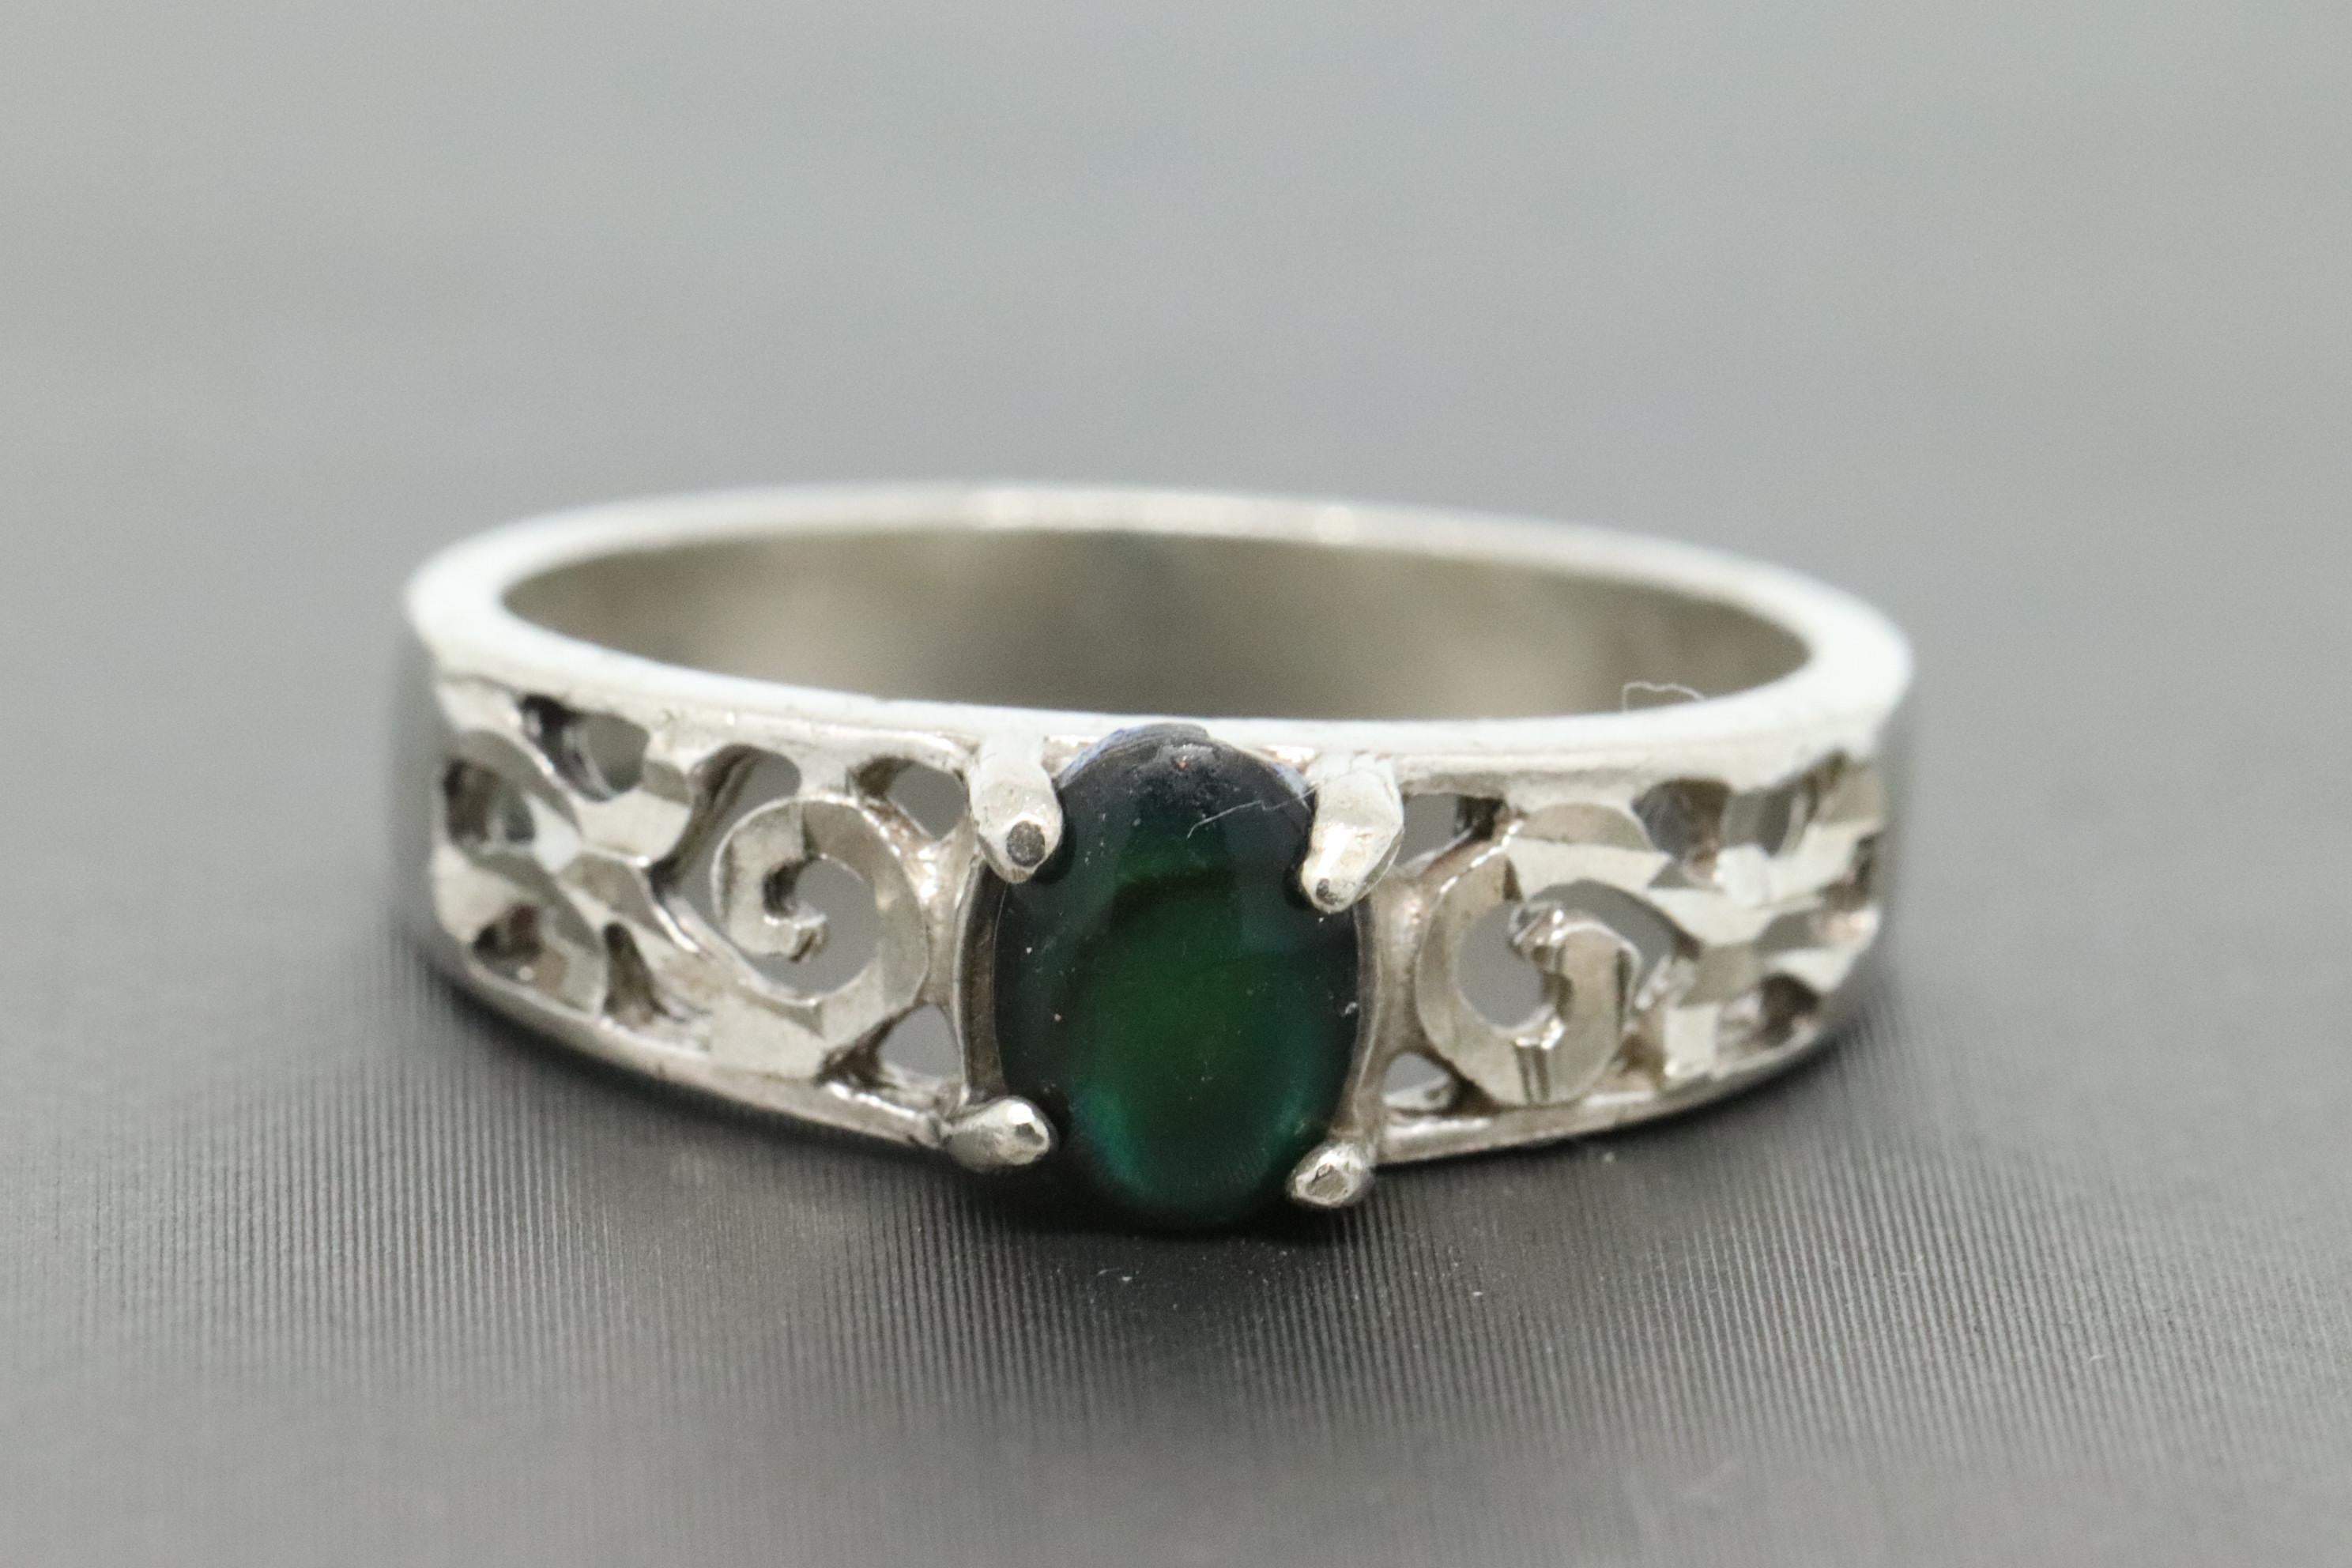 Vintage Filigree Sterling Silver Green Stone Ring Size 7.75 - Shop Thrifty Treasures